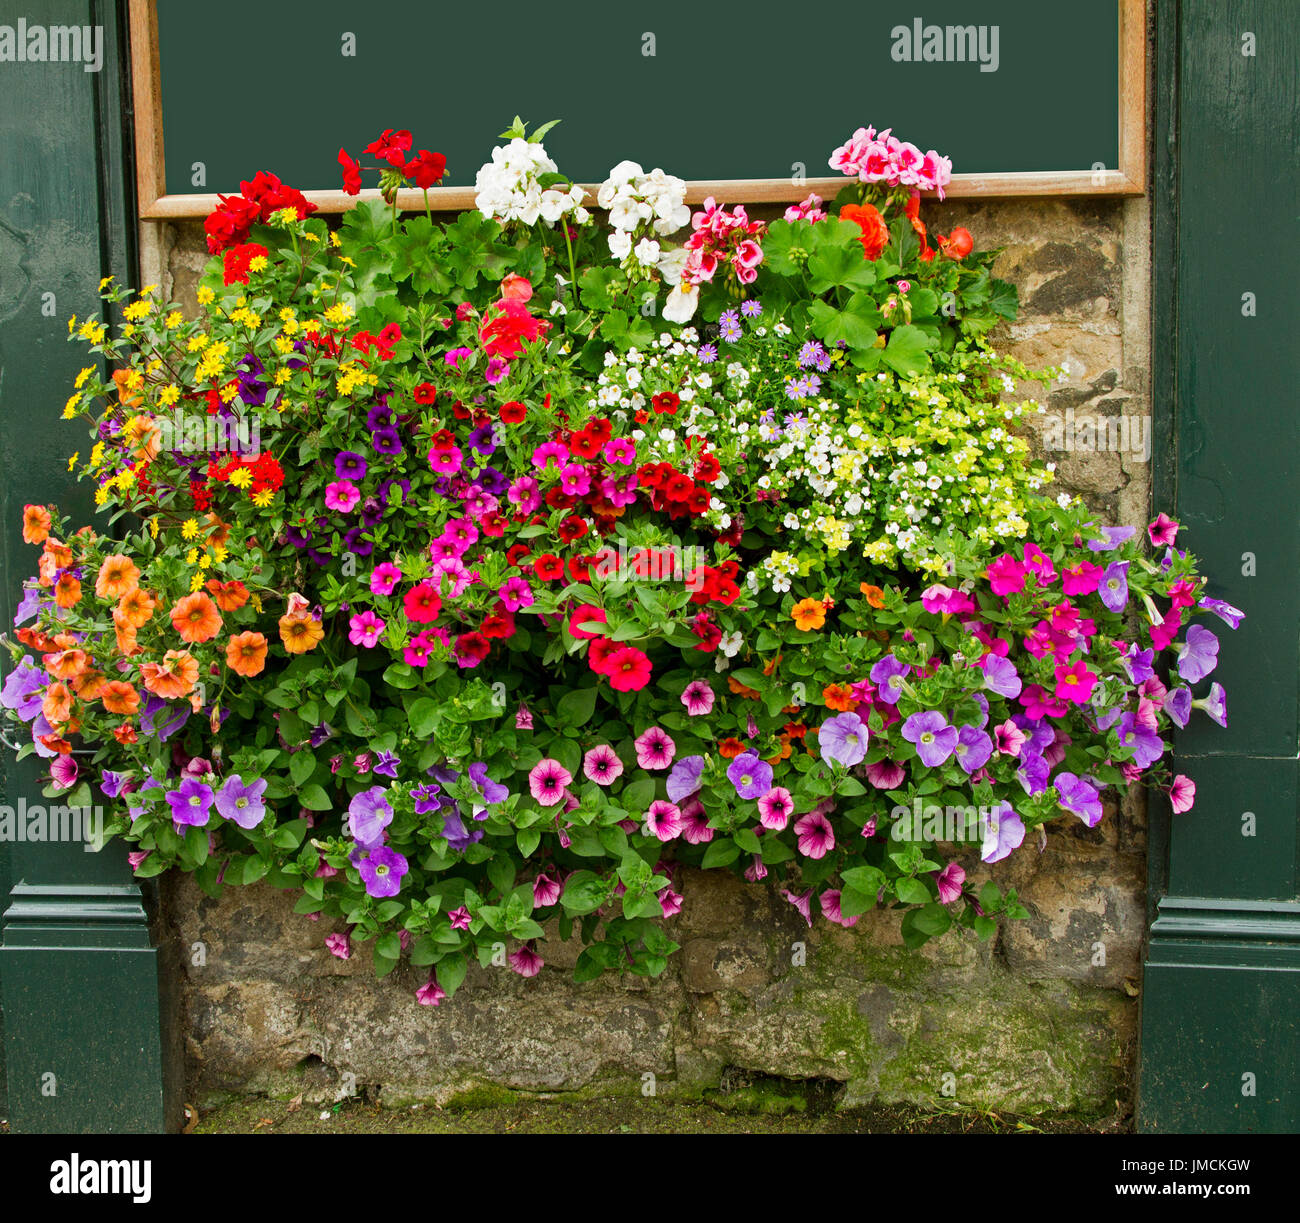 Mass of vivid flowers inc. orange, red, purple, pink calibrachoas and petunias, yellow daisies, & red geraniums, in hanging basket against stone wall Stock Photo